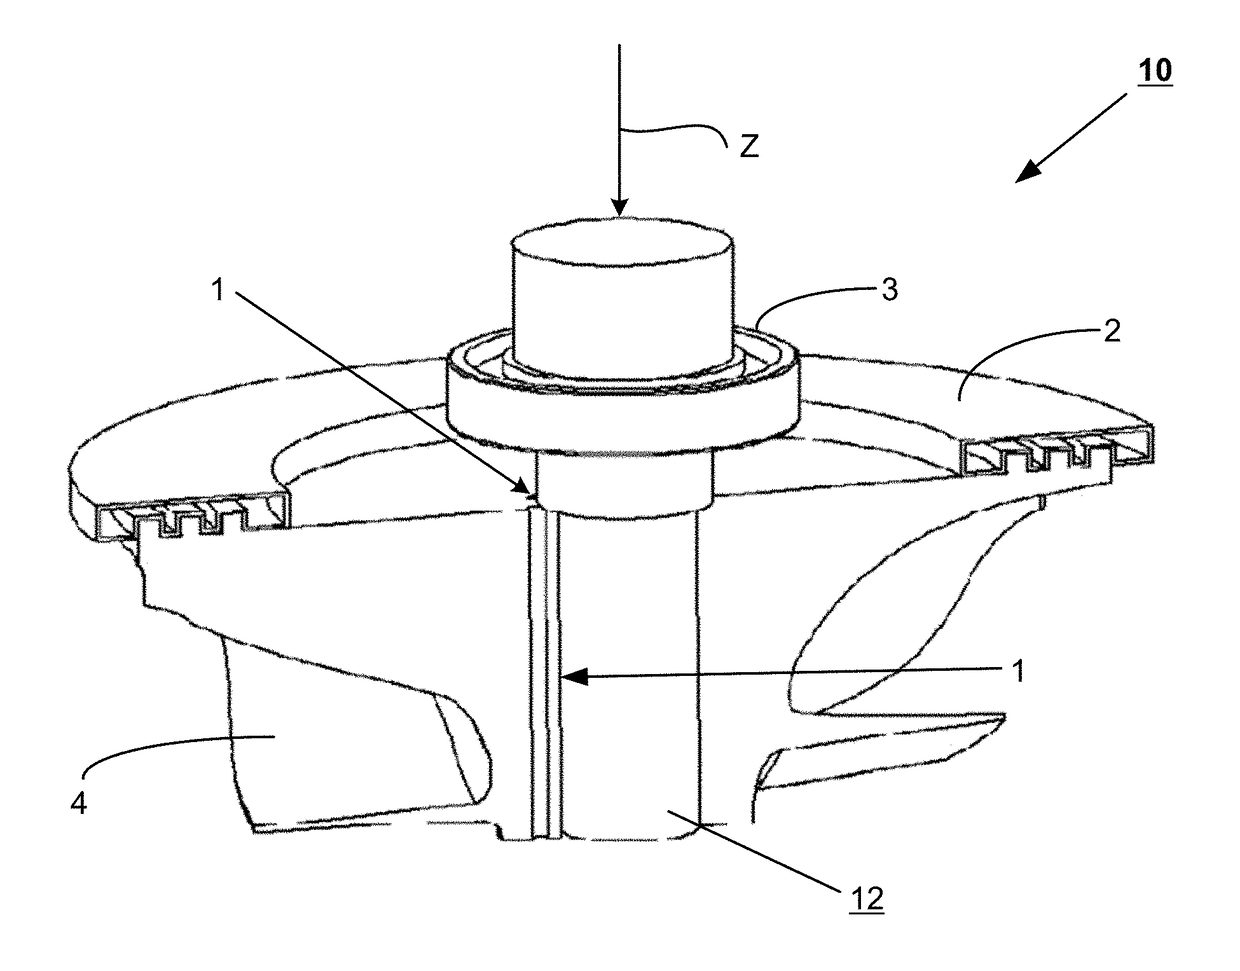 Thermodynamic cycle operating at low pressure using a radial turbine